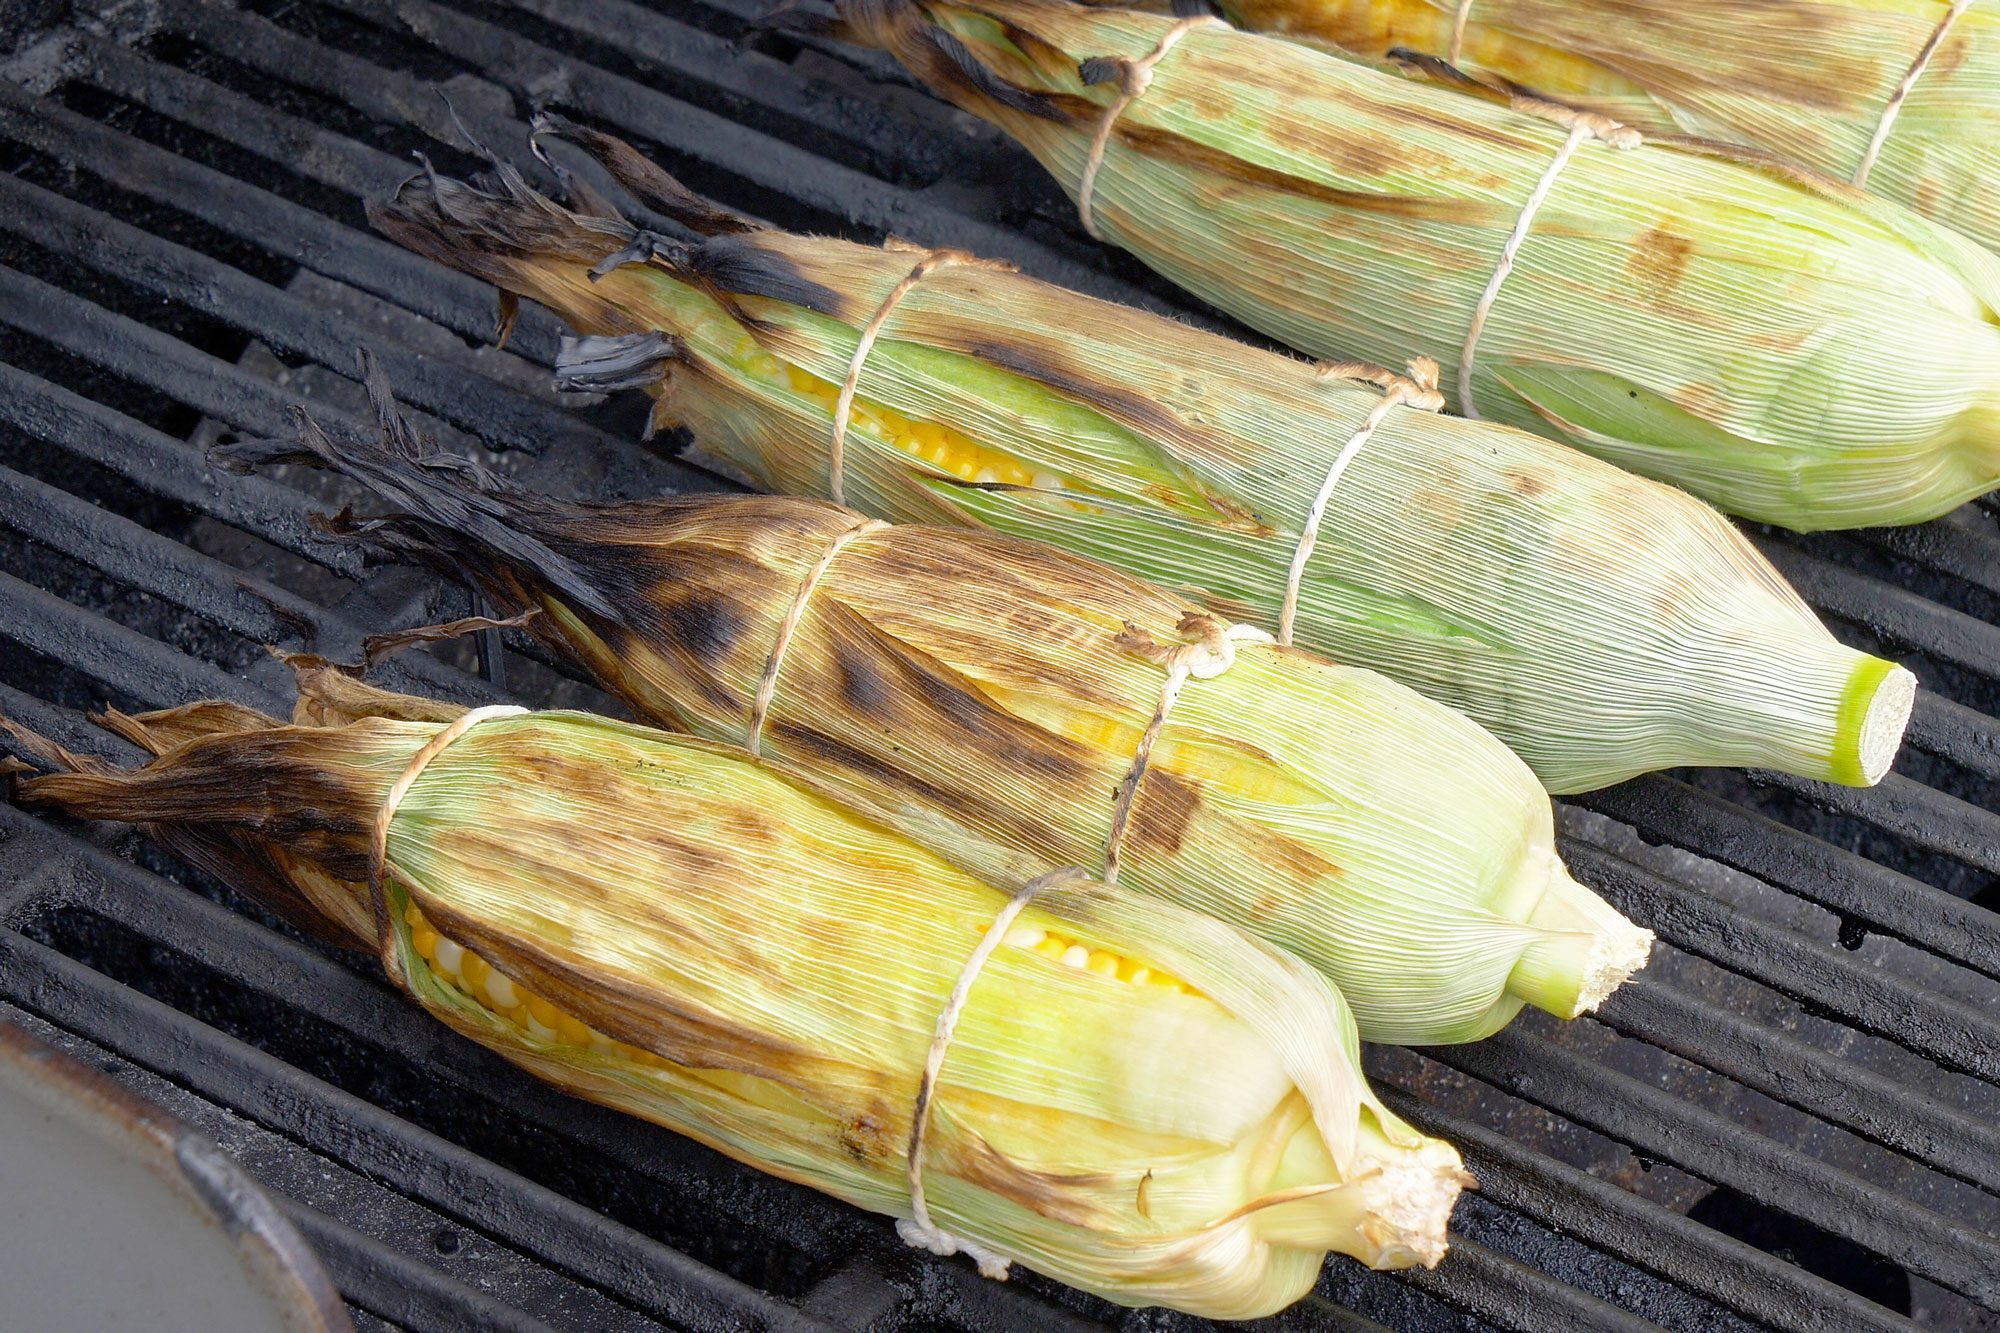 Grill the corn until tender